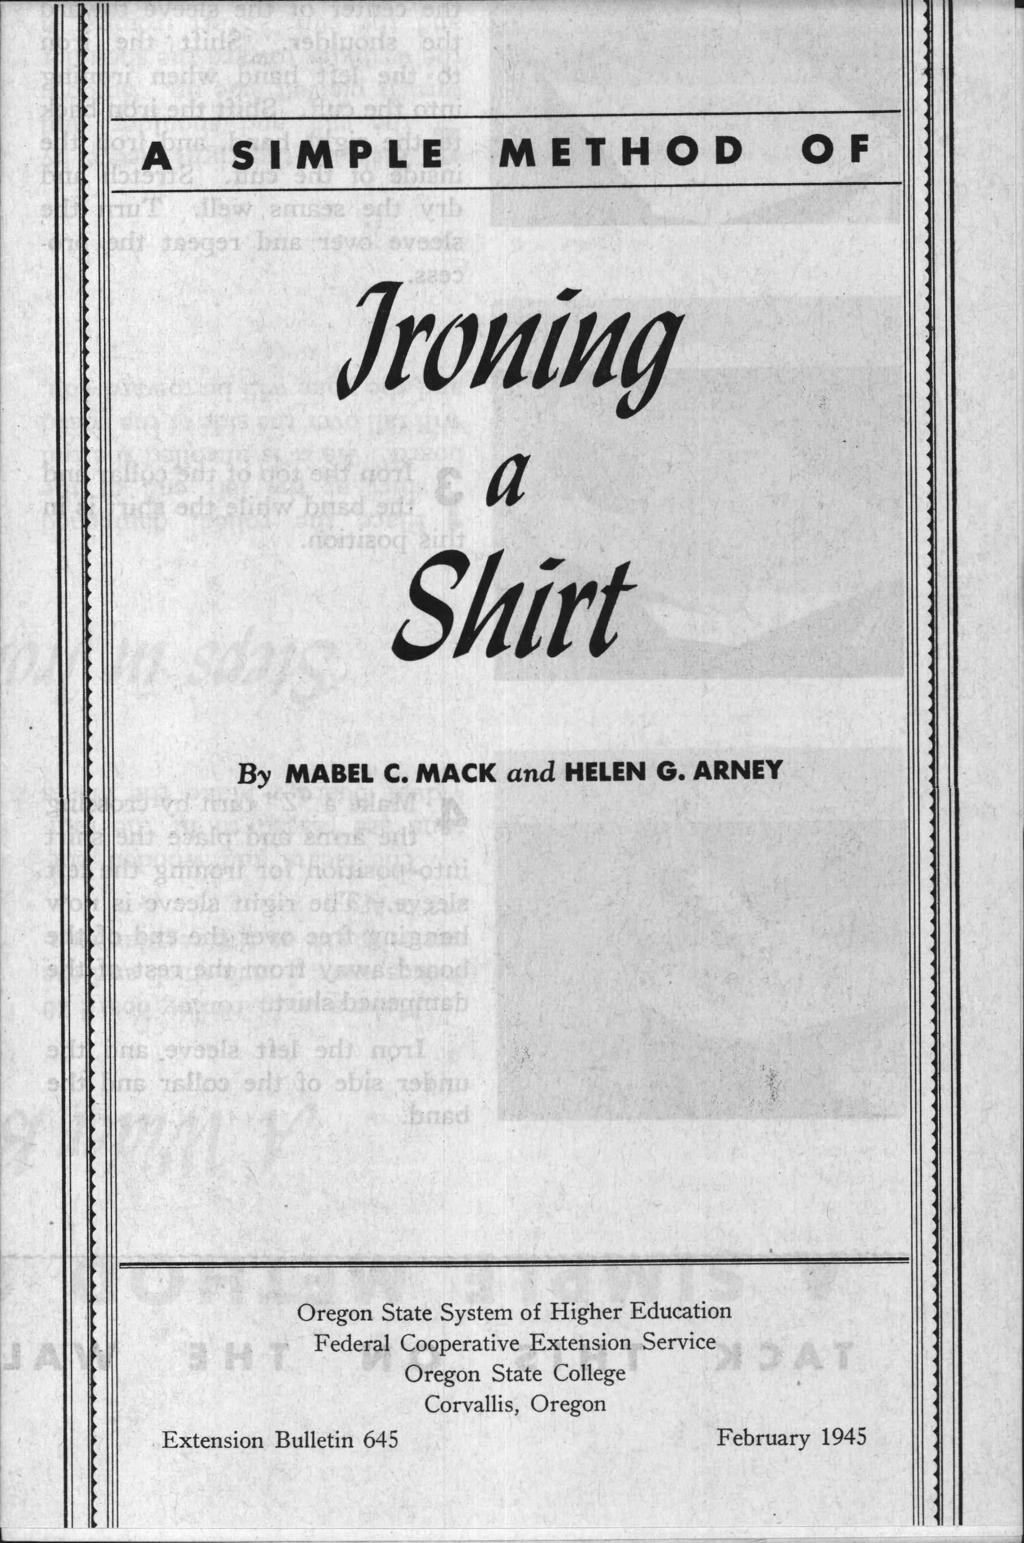 A SIMPLE METHOD OF kw* Shirt By MABEL C. MACK and HELEN G.